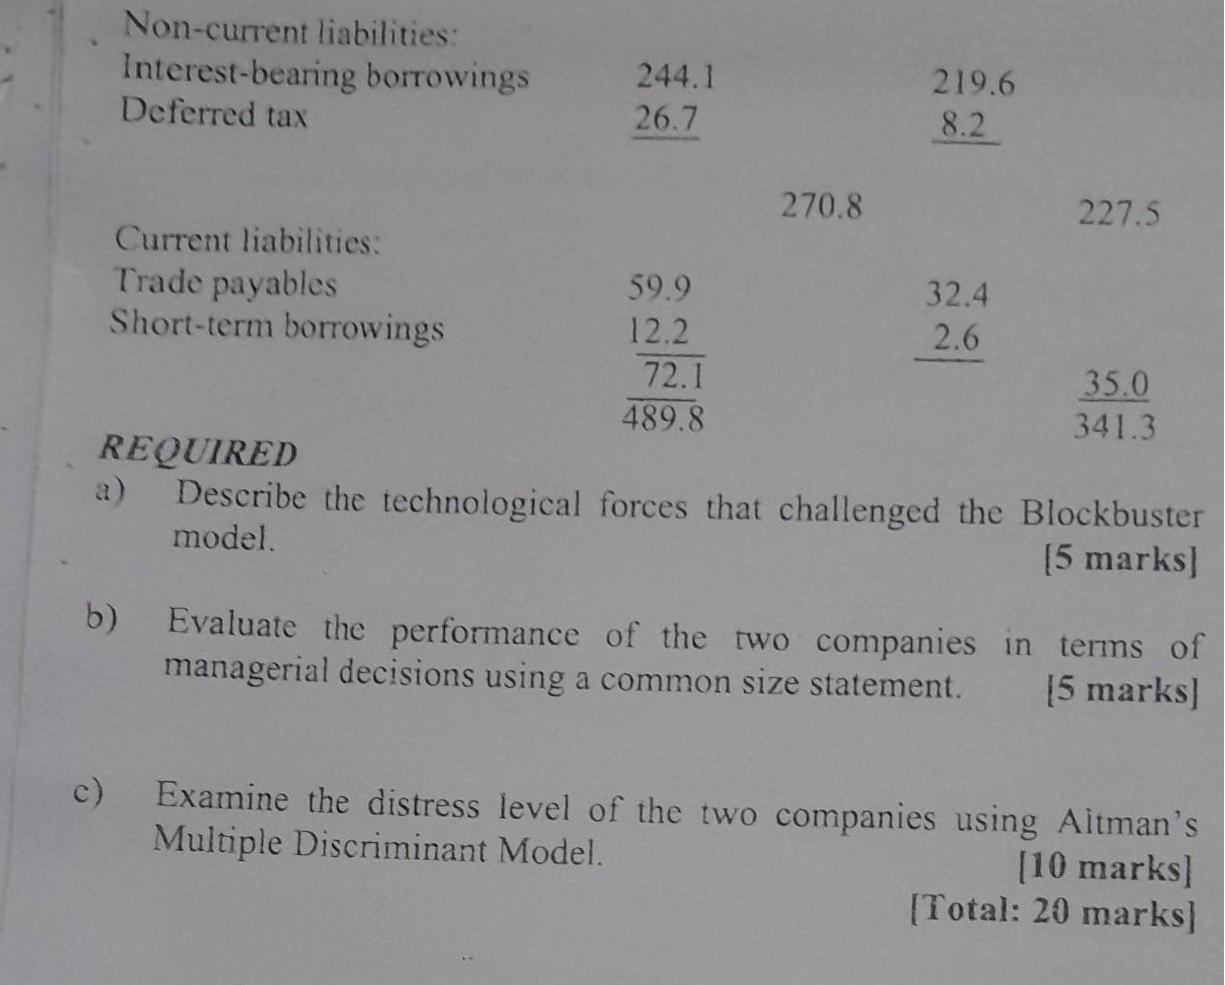 Non-current liabilities: Interest-bearing borrowings Deferred tax Current liabilities: Trade payables